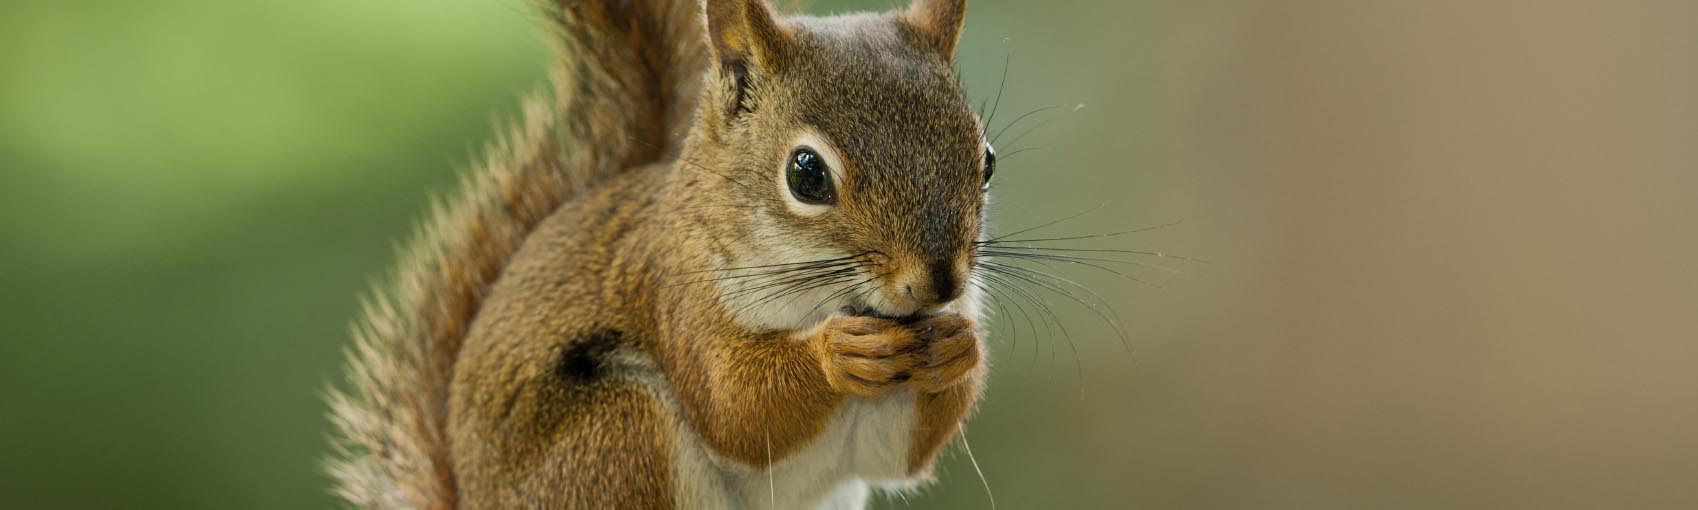 Image of a American Red Squirrel